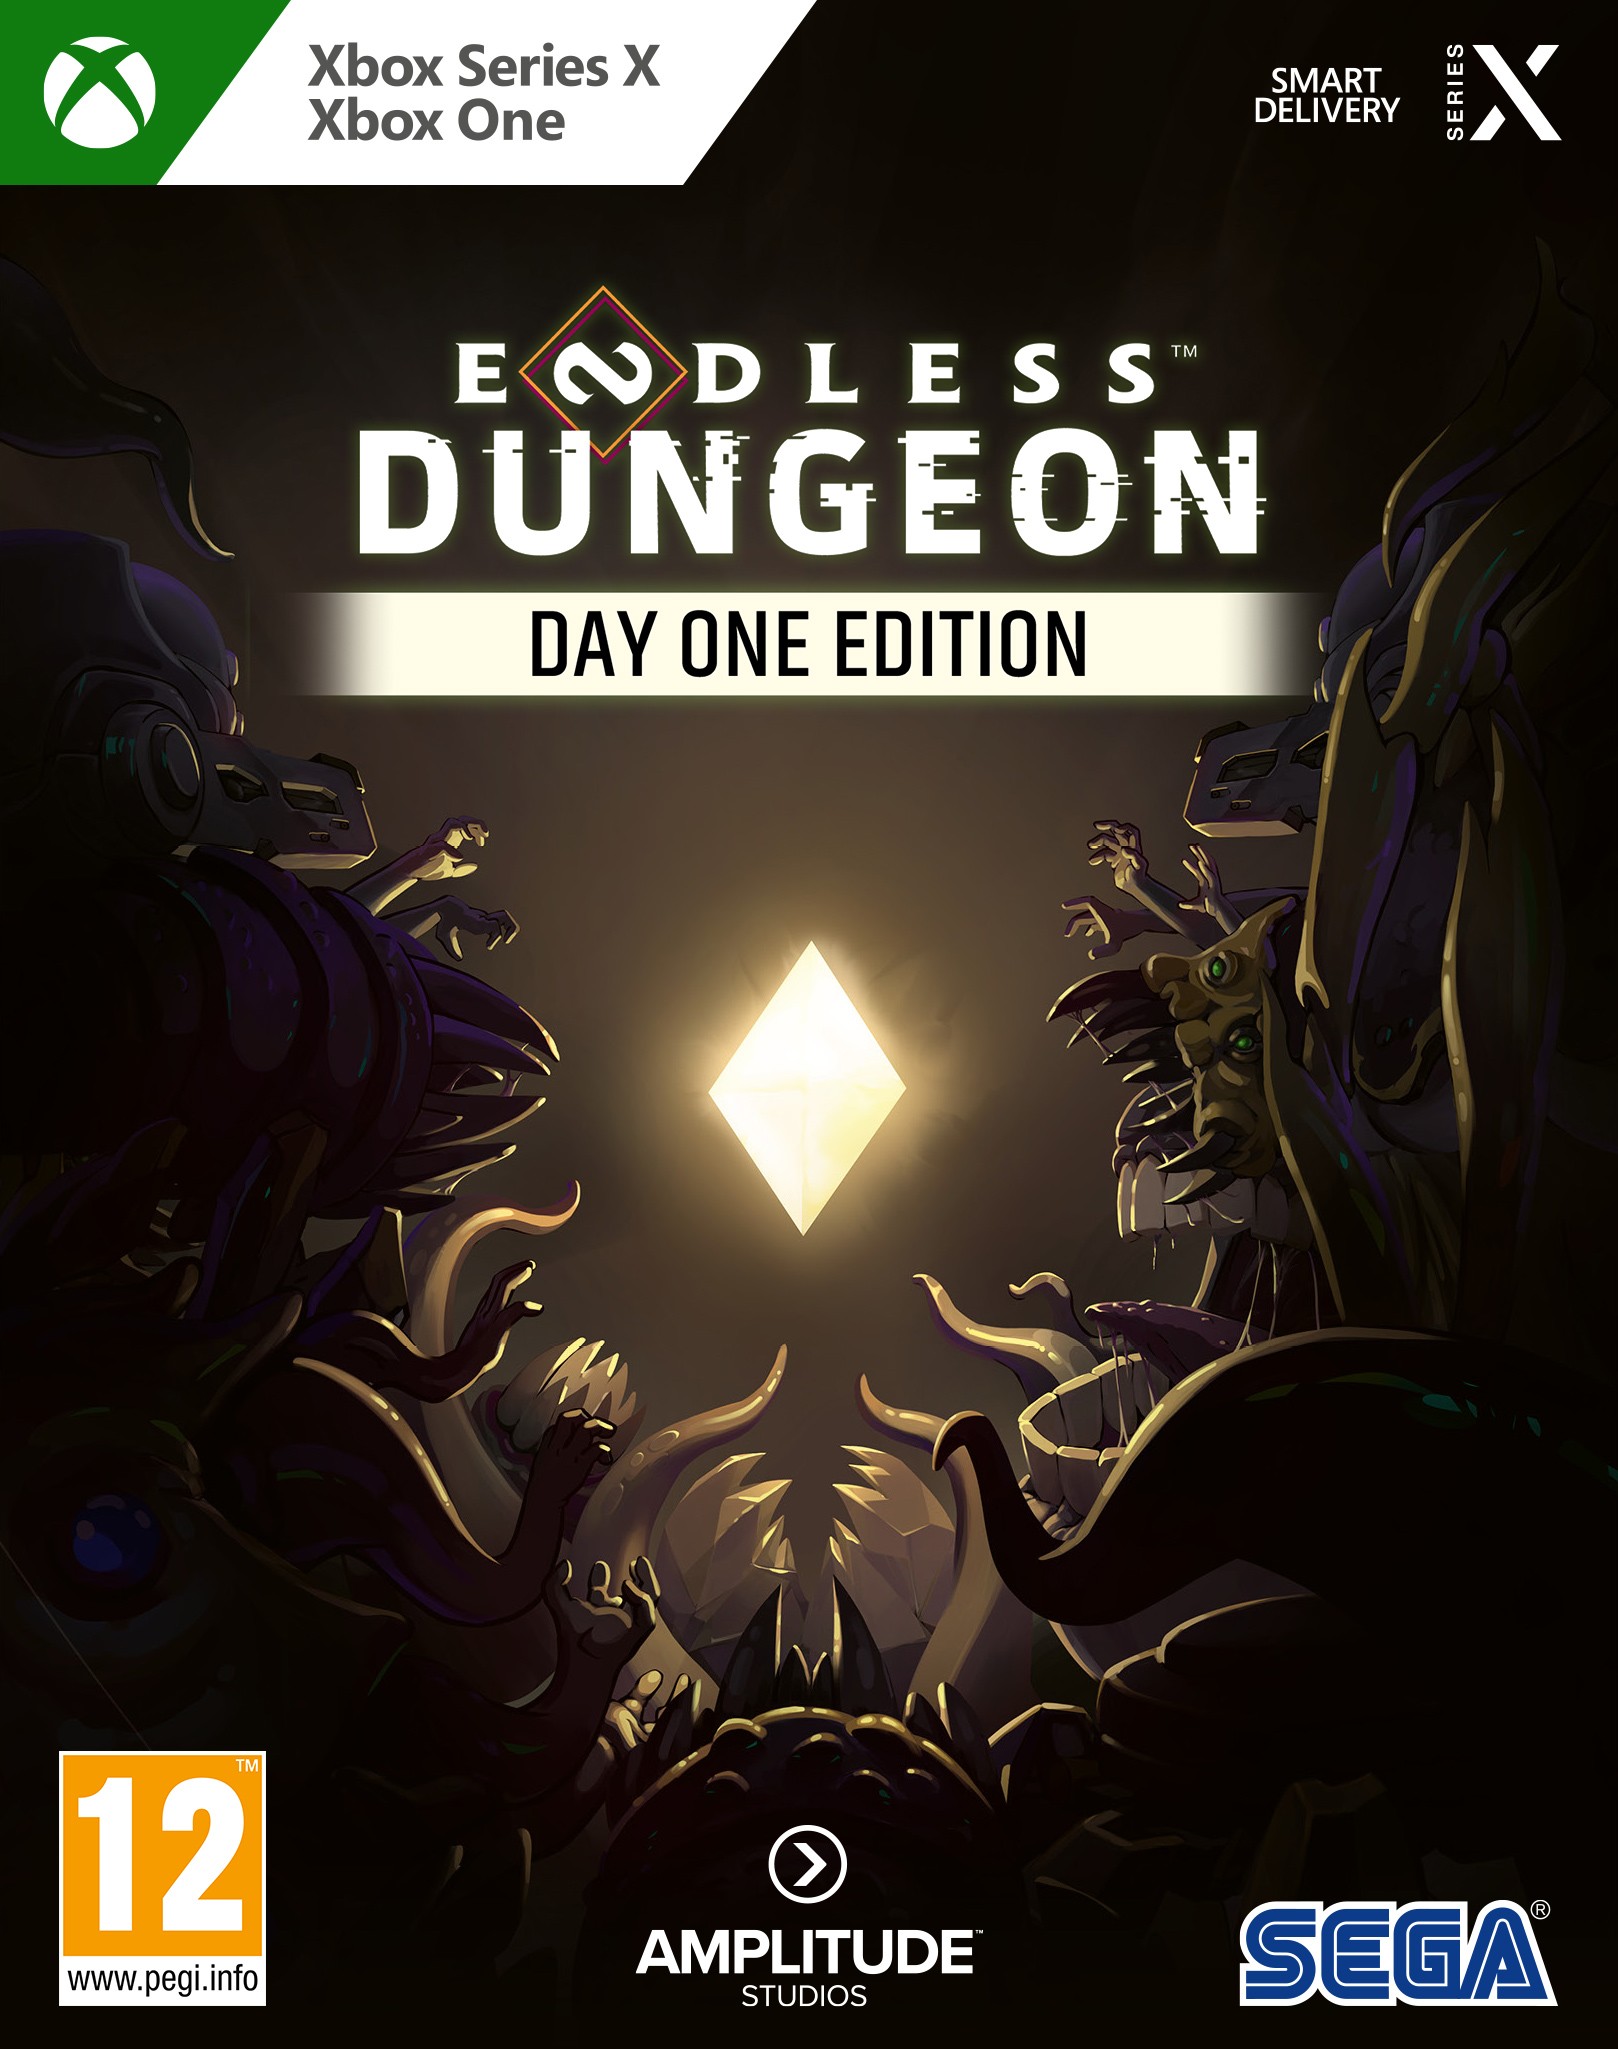 ENDLESS Dungeon Day One Edition